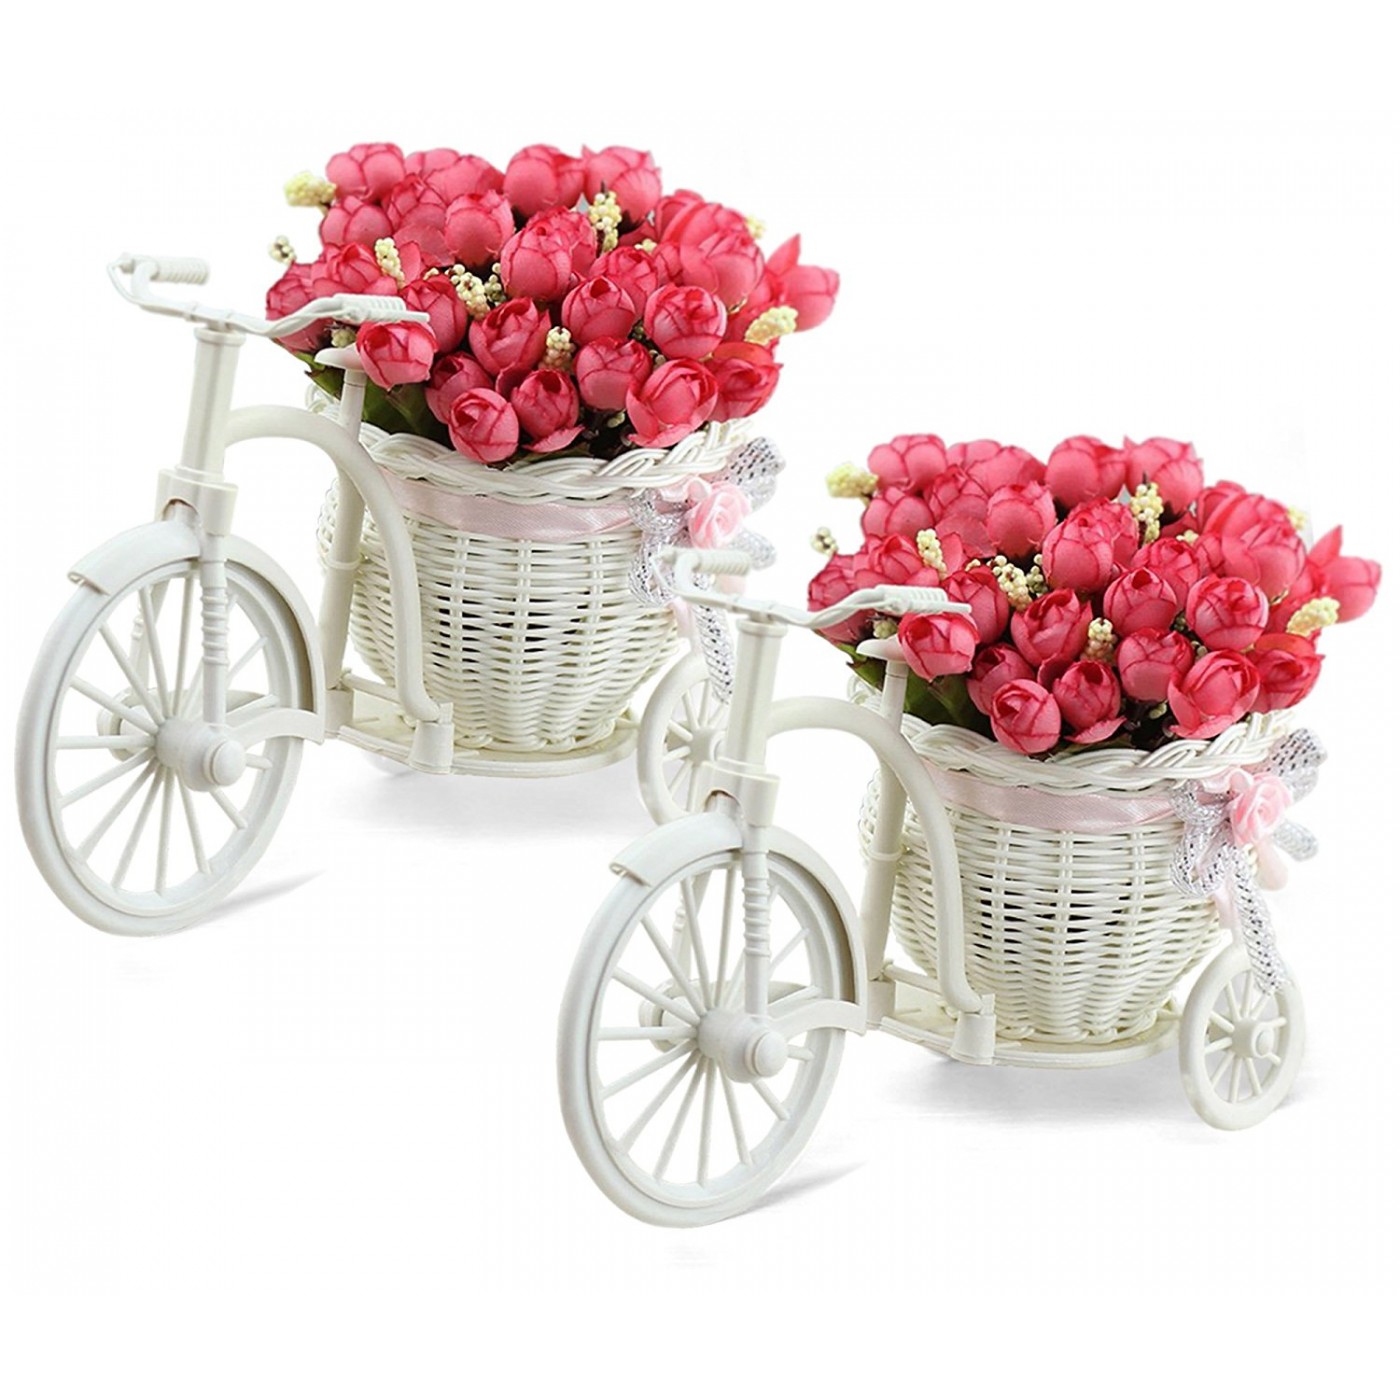 Cycle Shape Flower Vase with Flower Bunches (Set of 2)